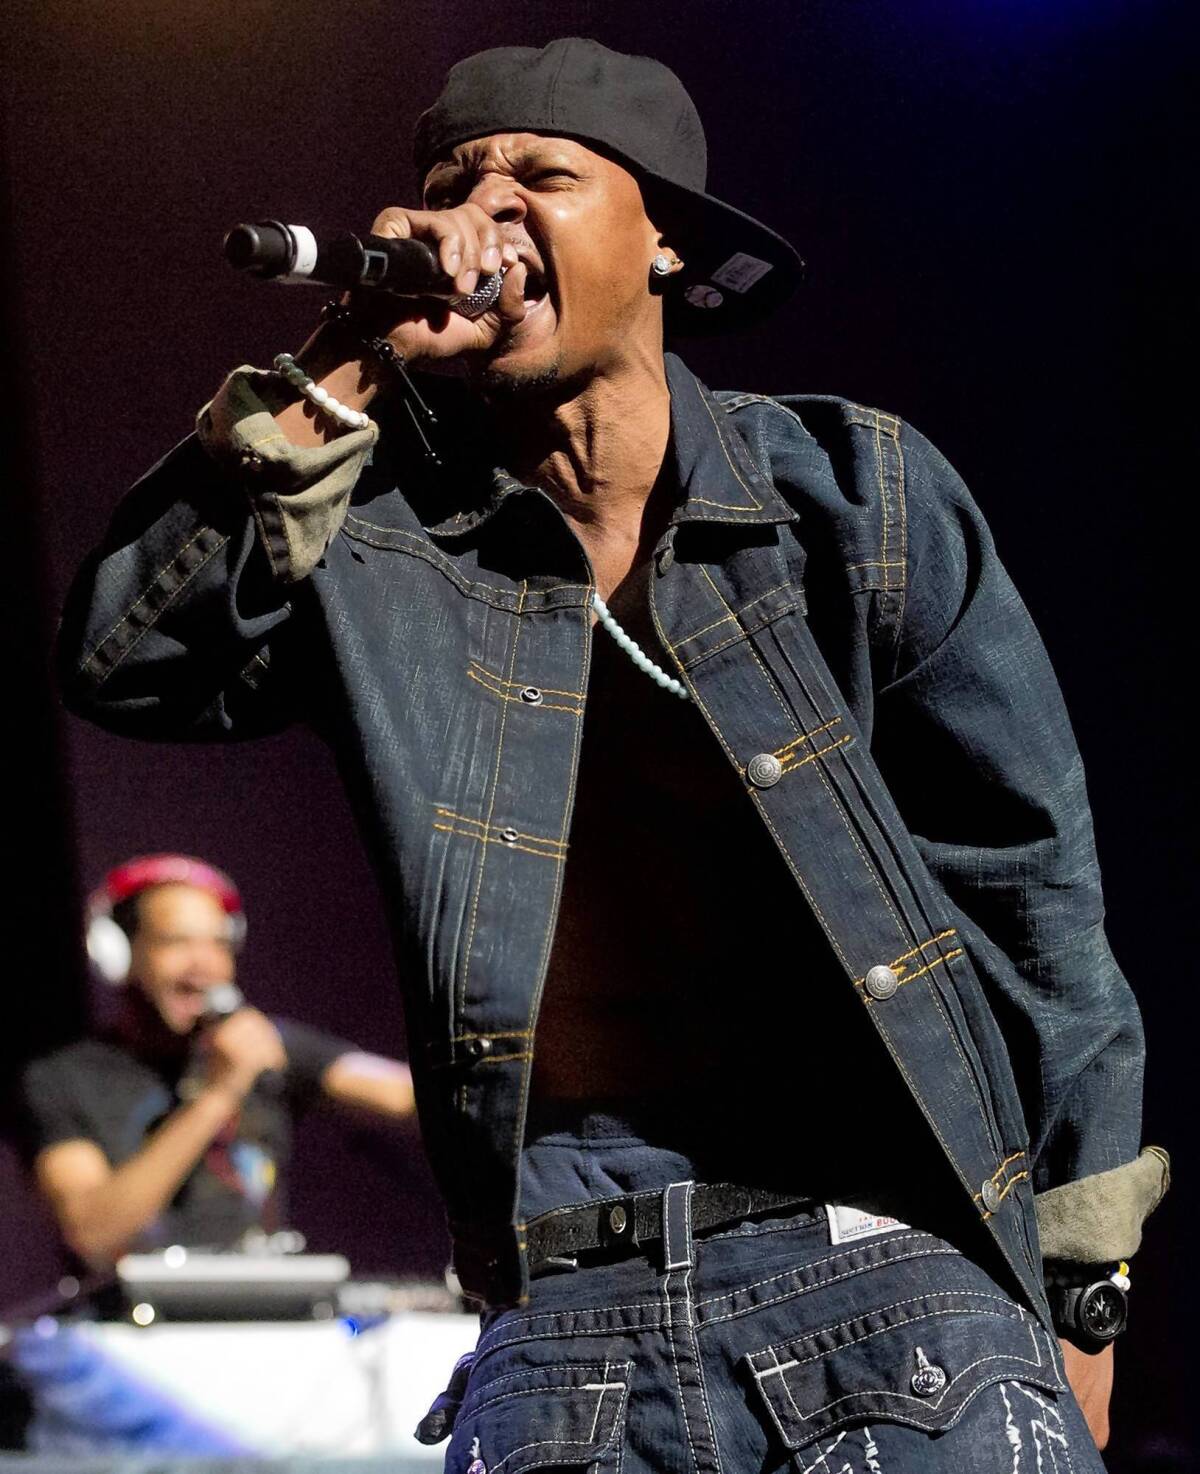 Rapper Chris Kelly of Kris Kross was pronounced dead at an Atlanta hospital of an apparent drug overdose, authorities said.